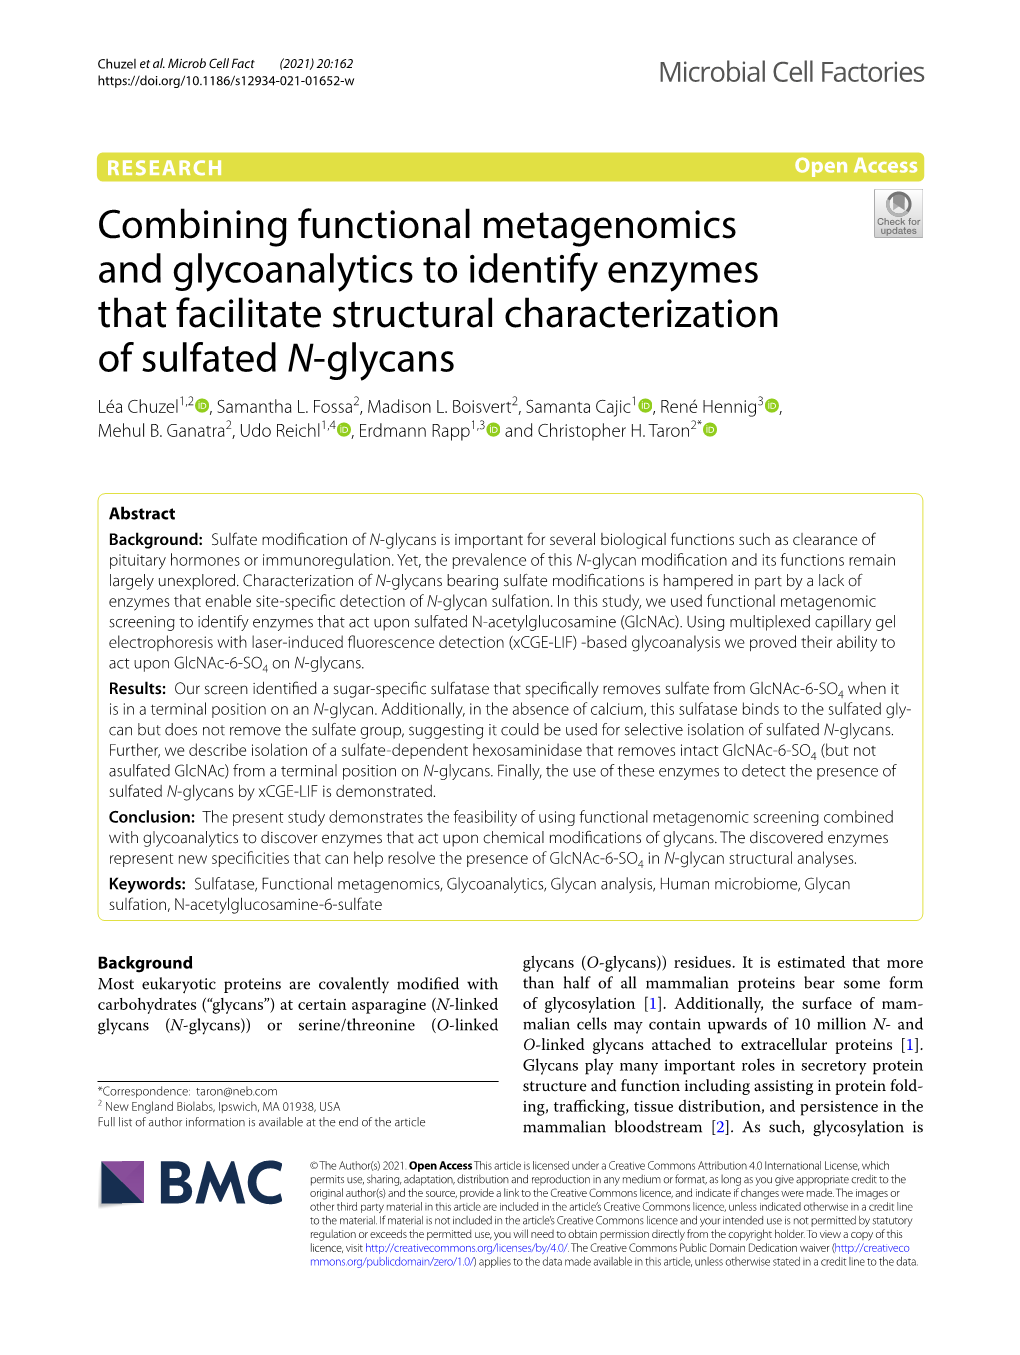 Combining Functional Metagenomics and Glycoanalytics to Identify Enzymes That Facilitate Structural Characterization of Sulfated N‑Glycans Léa Chuzel1,2 , Samantha L